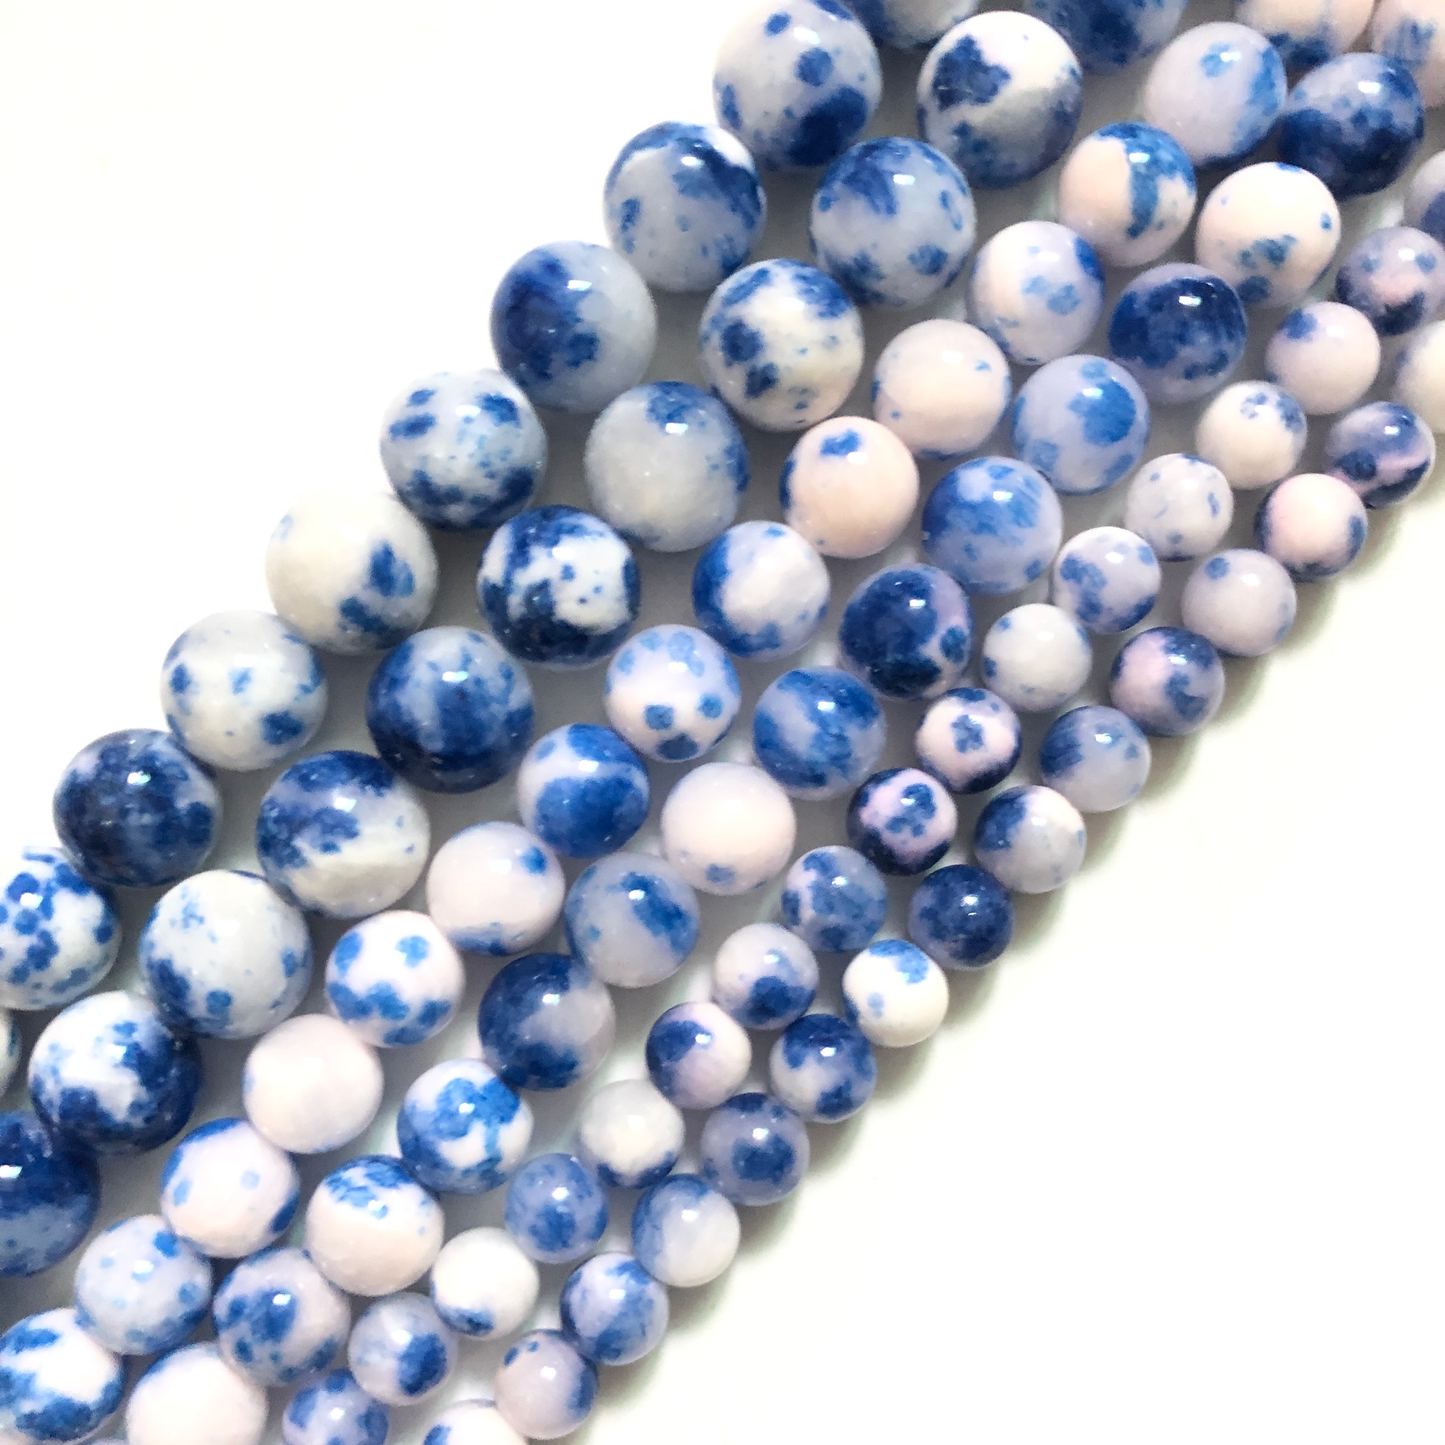 2 Strands/lot 8mm, 10mm, 12mm Blue White Persian Jade Round Stone Beads Stone Beads 12mm Stone Beads 8mm Stone Beads New Beads Arrivals Persian Jade Beads Round Jade Beads Charms Beads Beyond